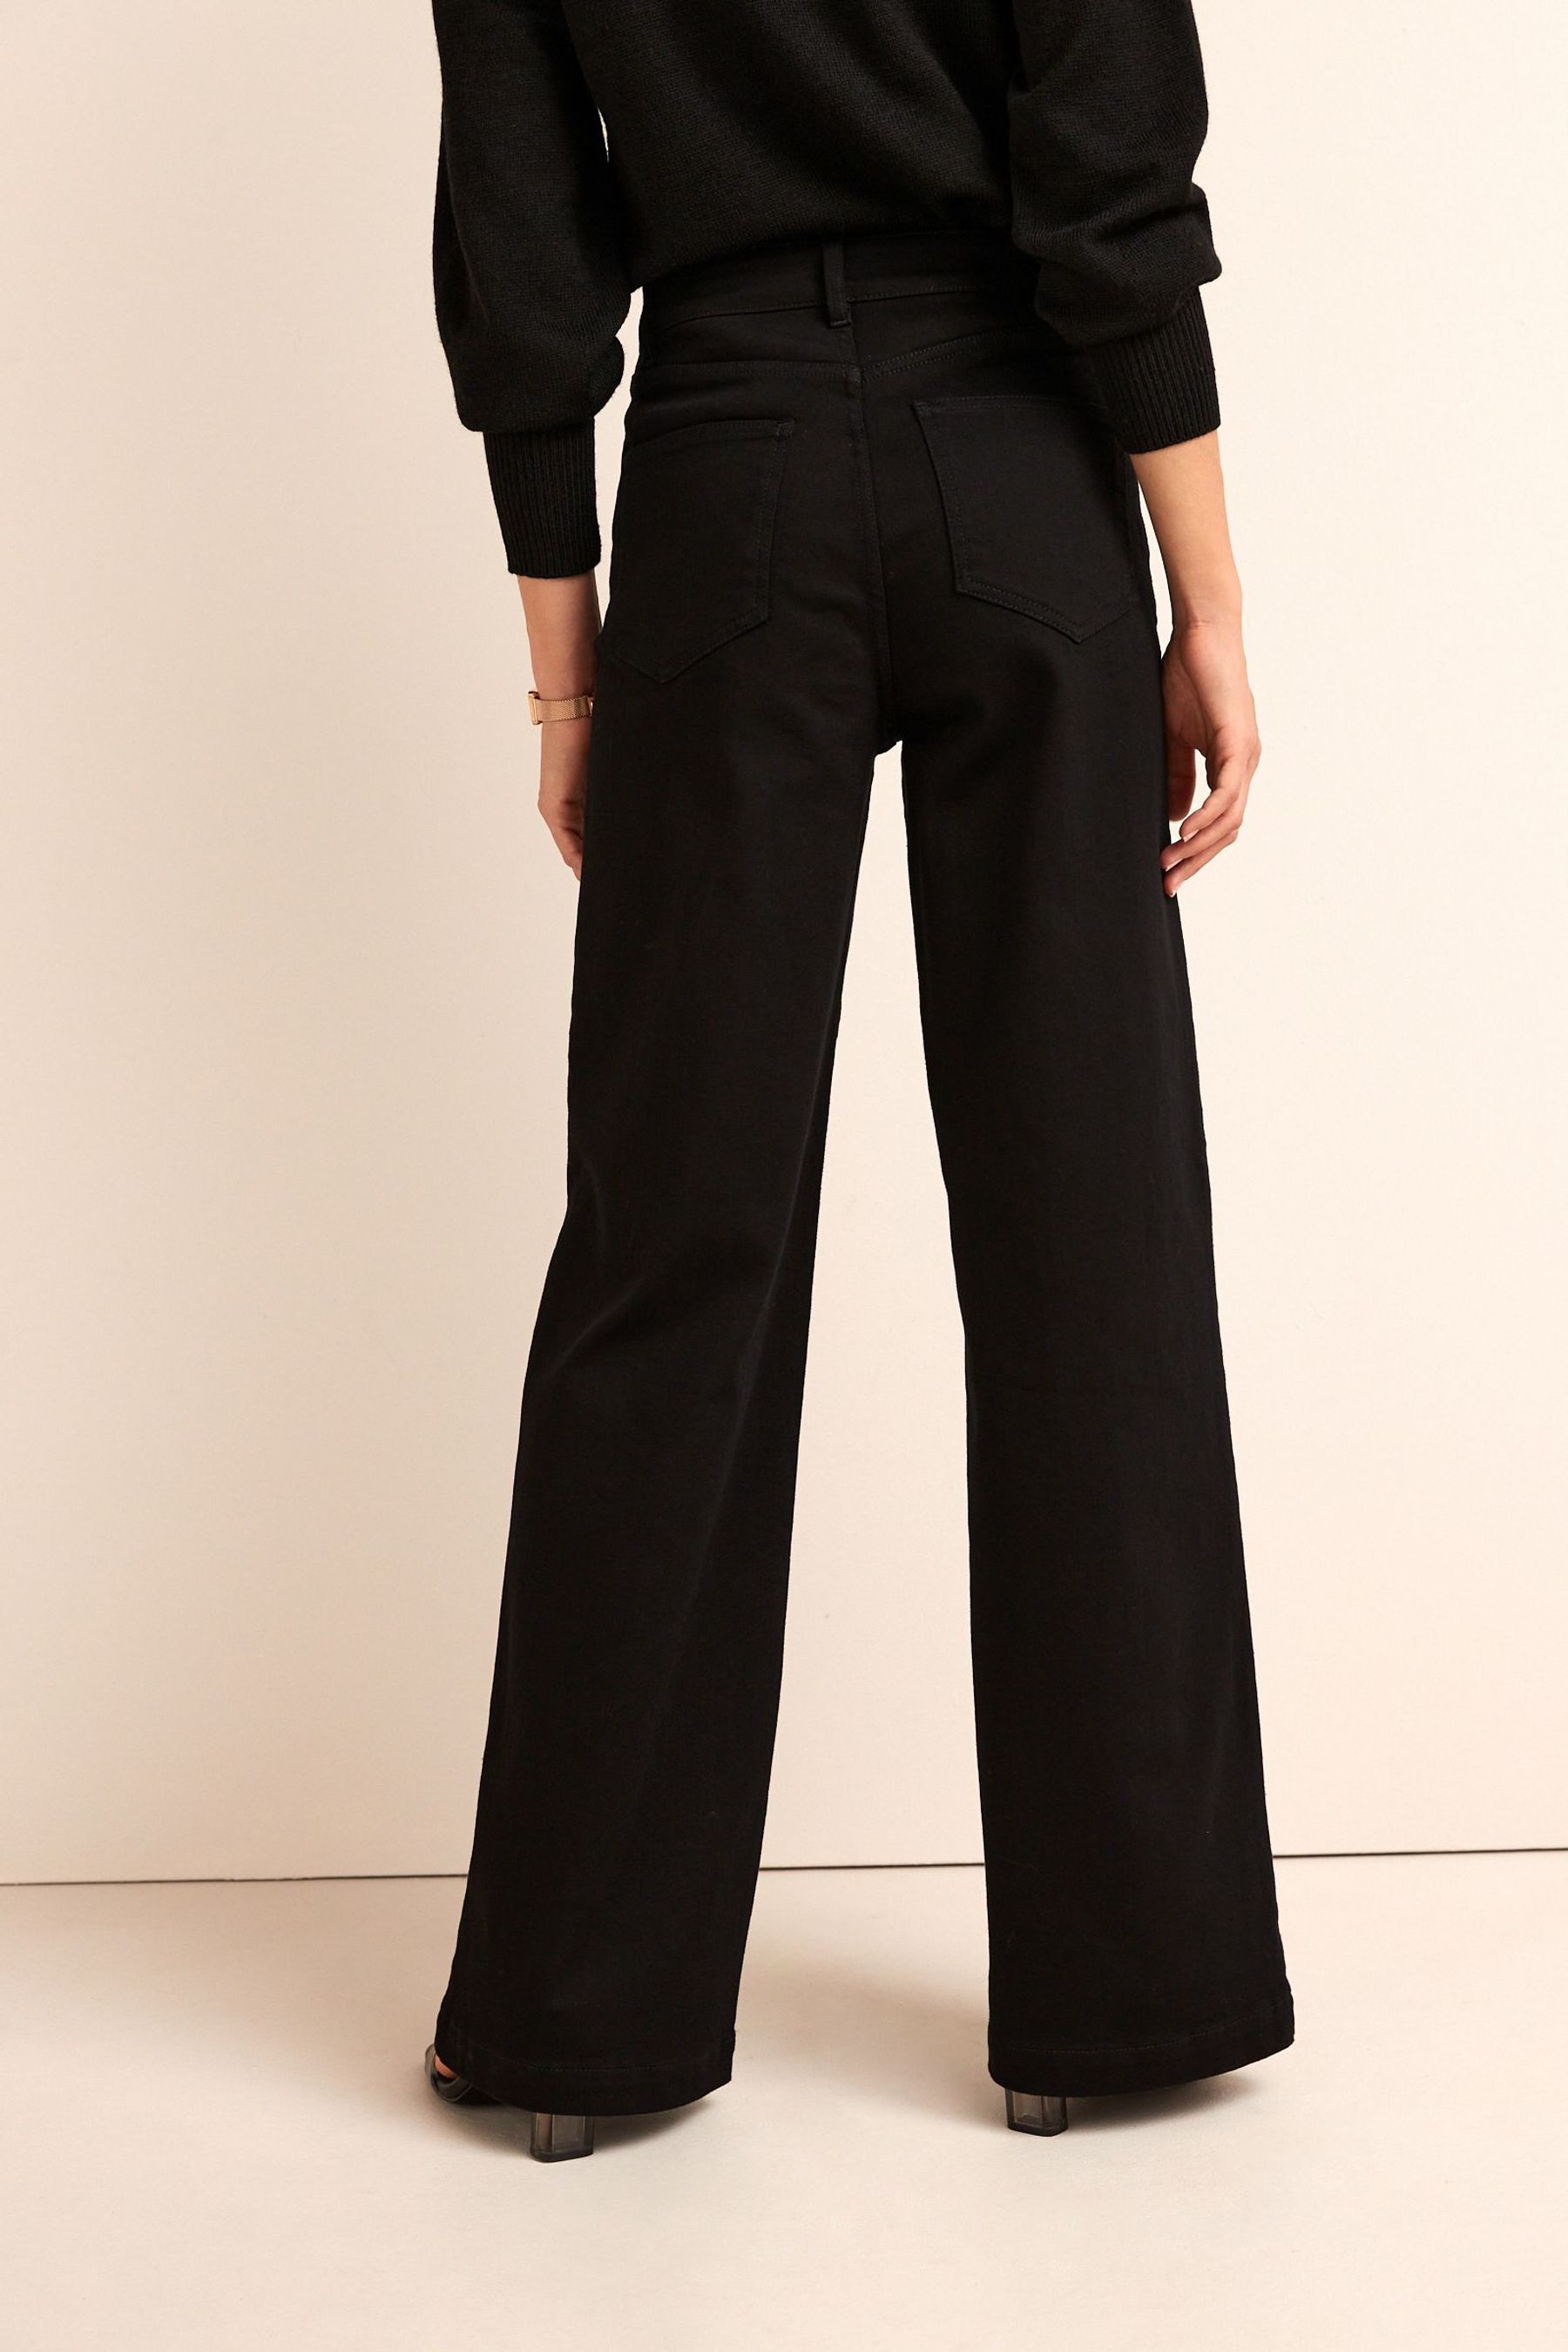 Buy Black Hourglass Wide Leg Jeans from the Next UK online shop